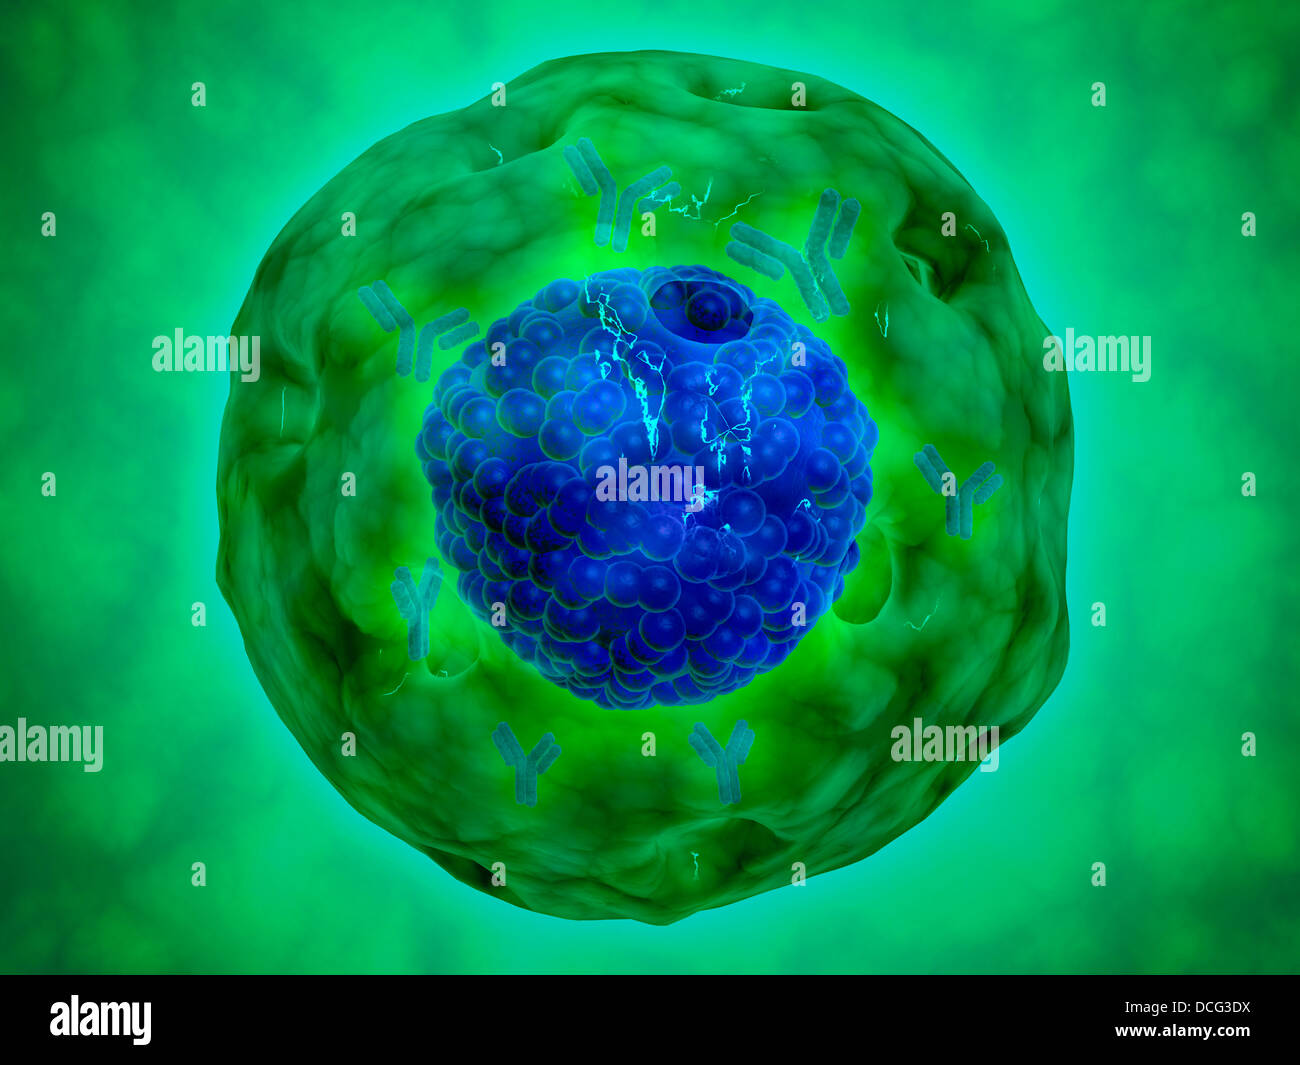 Cell nucleus with chromosome. The cell nucleus helps control eating, movement, and reproduction. Stock Photo